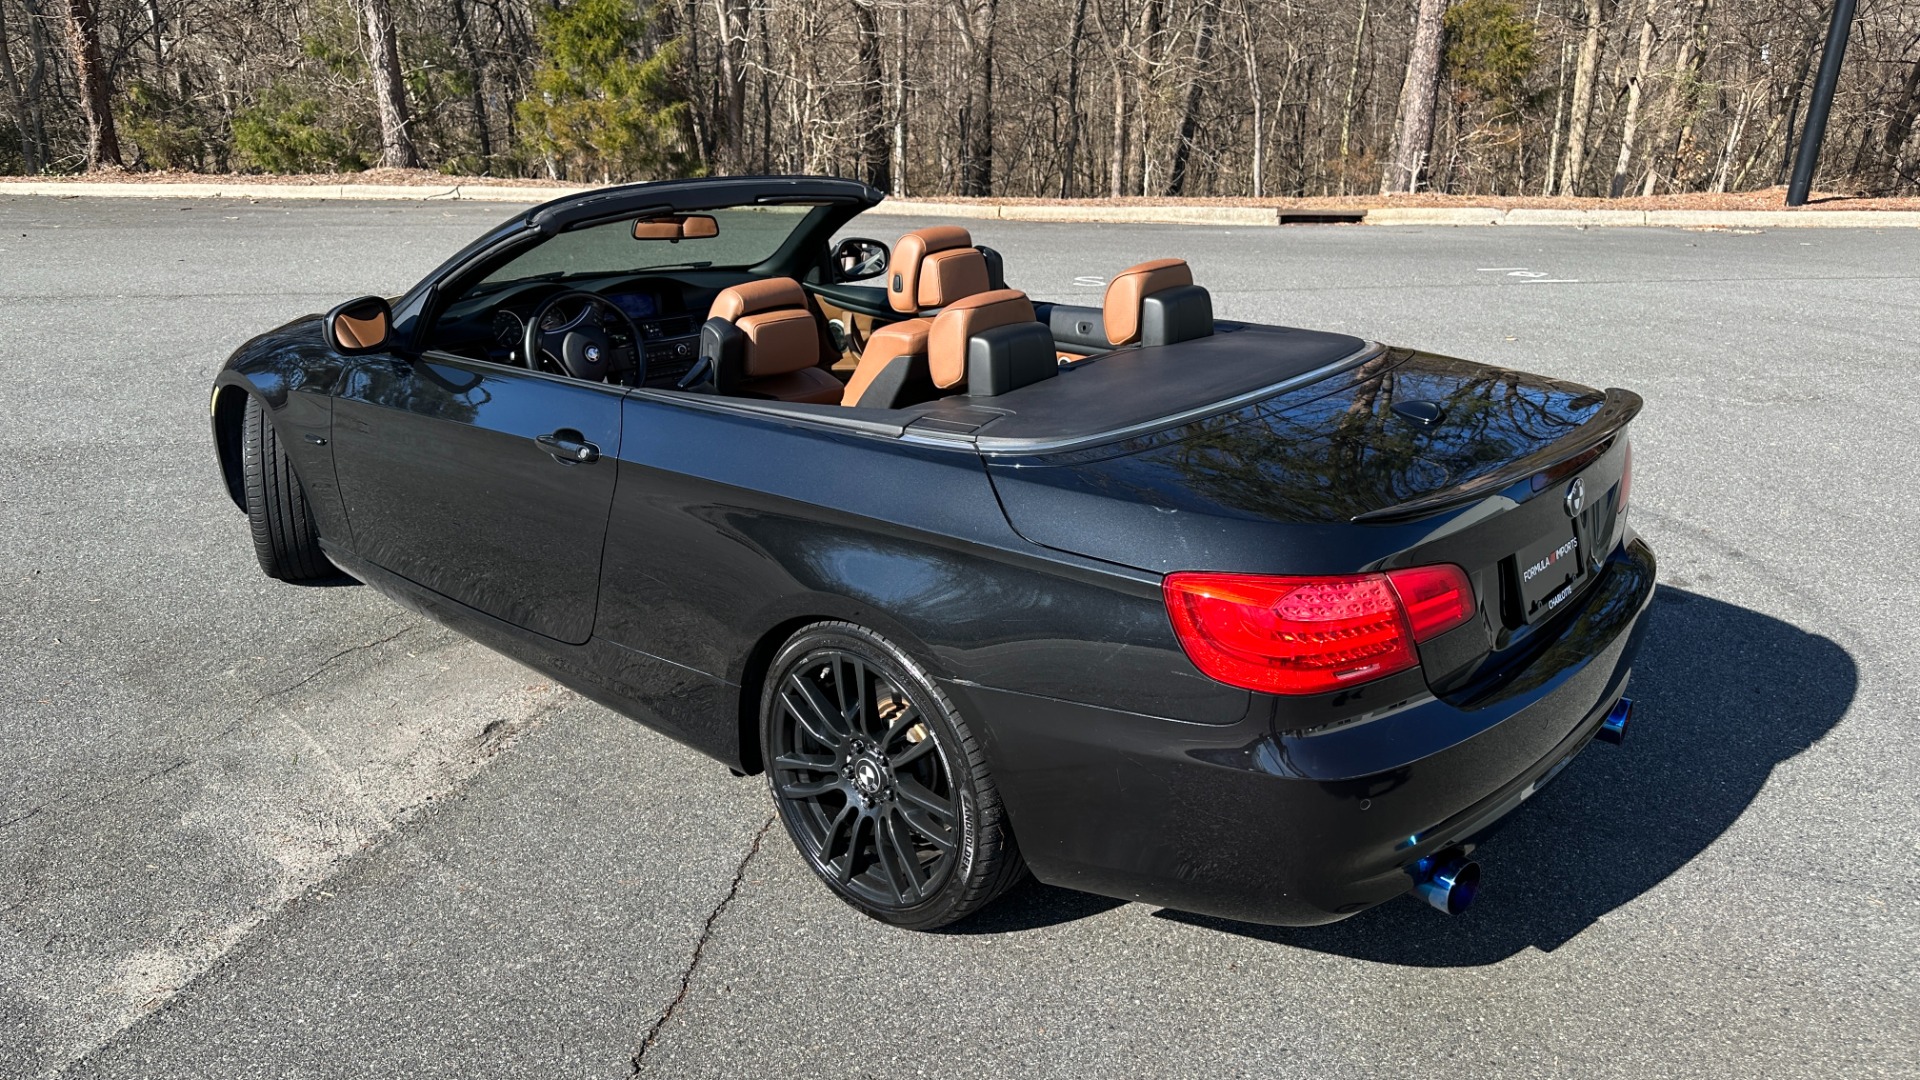 Used 2011 BMW 3 Series 335i / TURBO / HARD TOP CONVERTIBLE / LEATHER / BLACKOUT for sale $10,995 at Formula Imports in Charlotte NC 28227 7